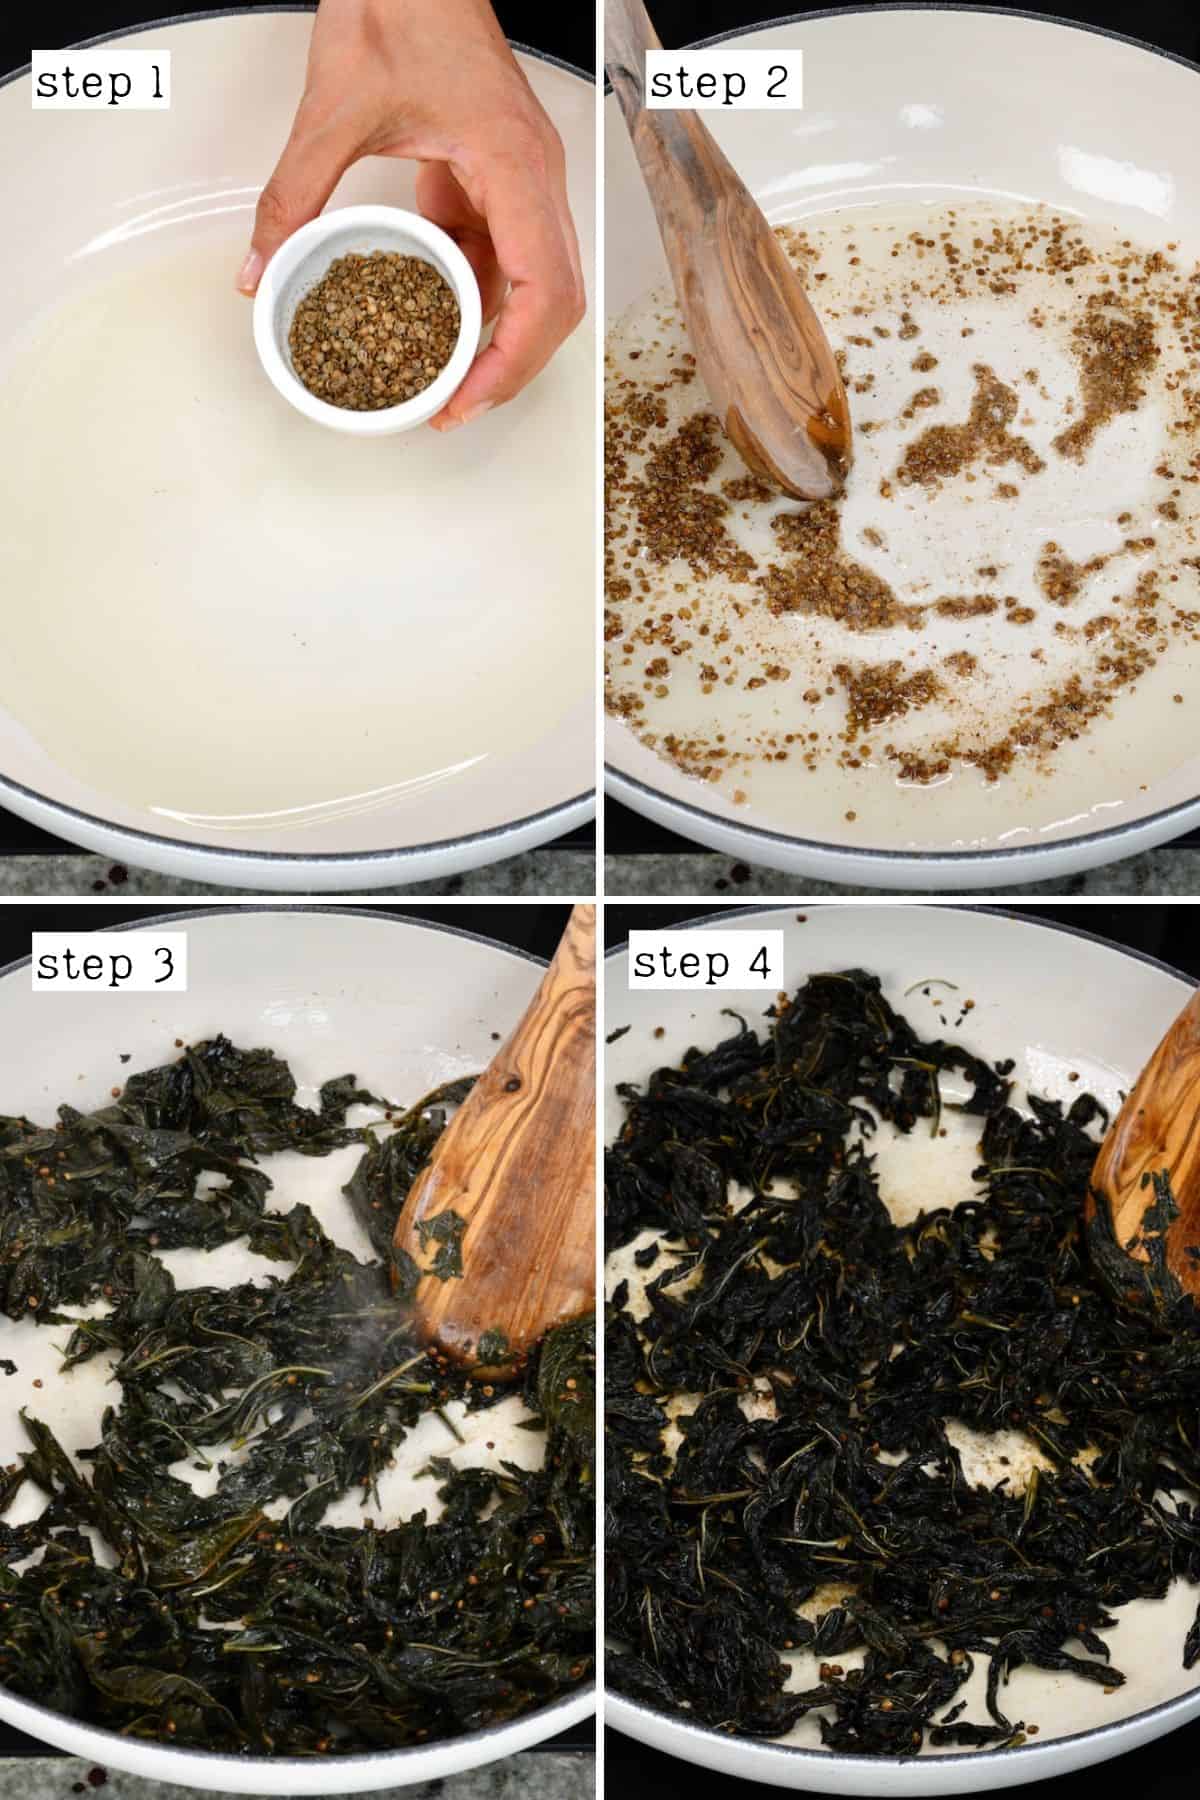 Steps for cooking Jew's mallow